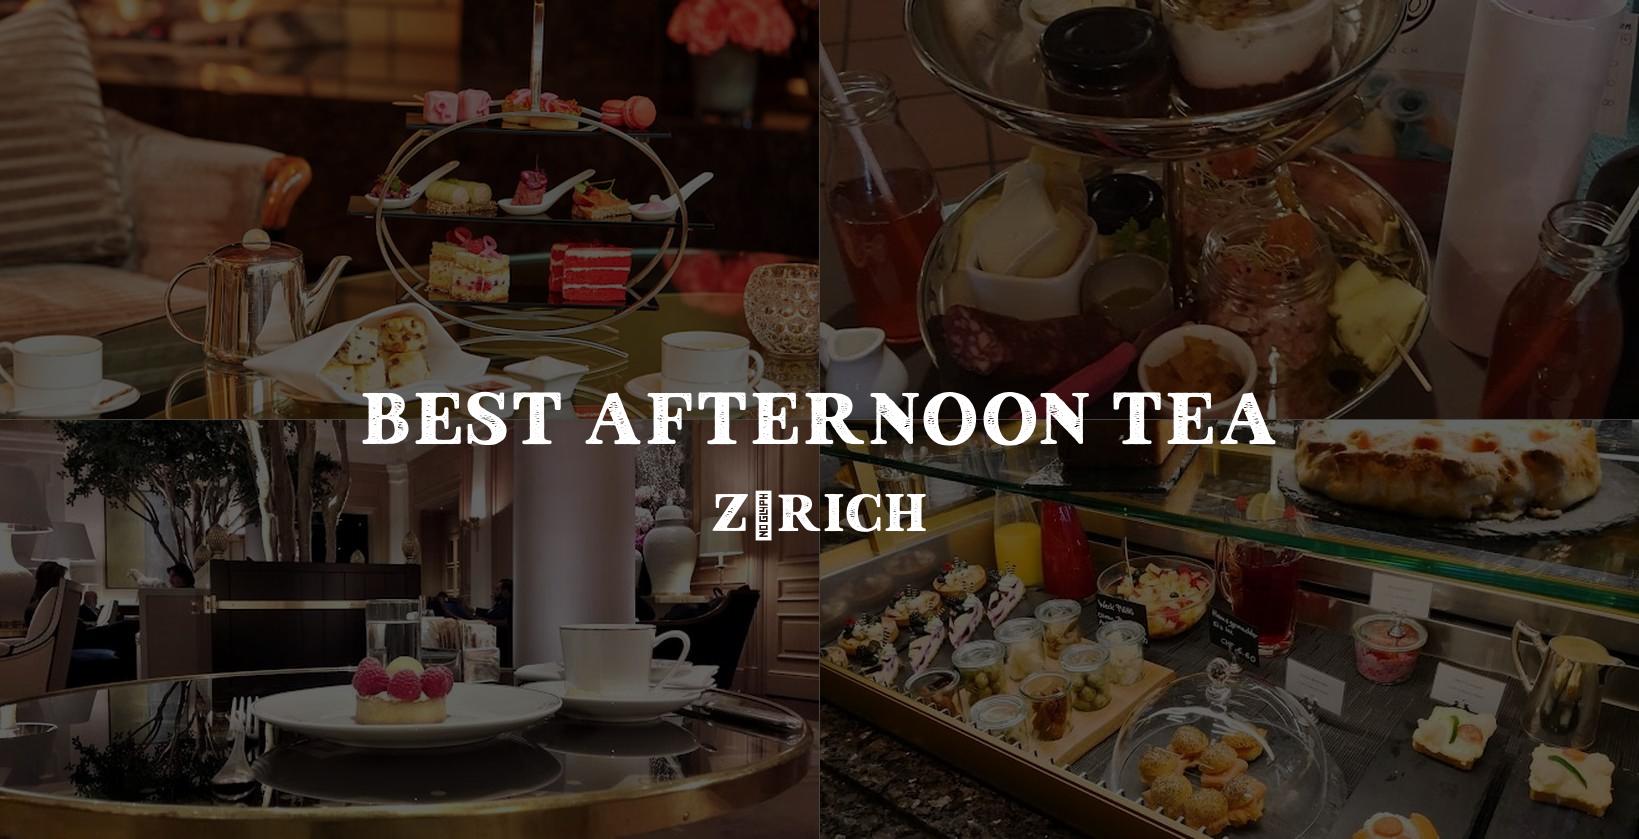 Choosing the perfect spot for afternoon tea in Zürich